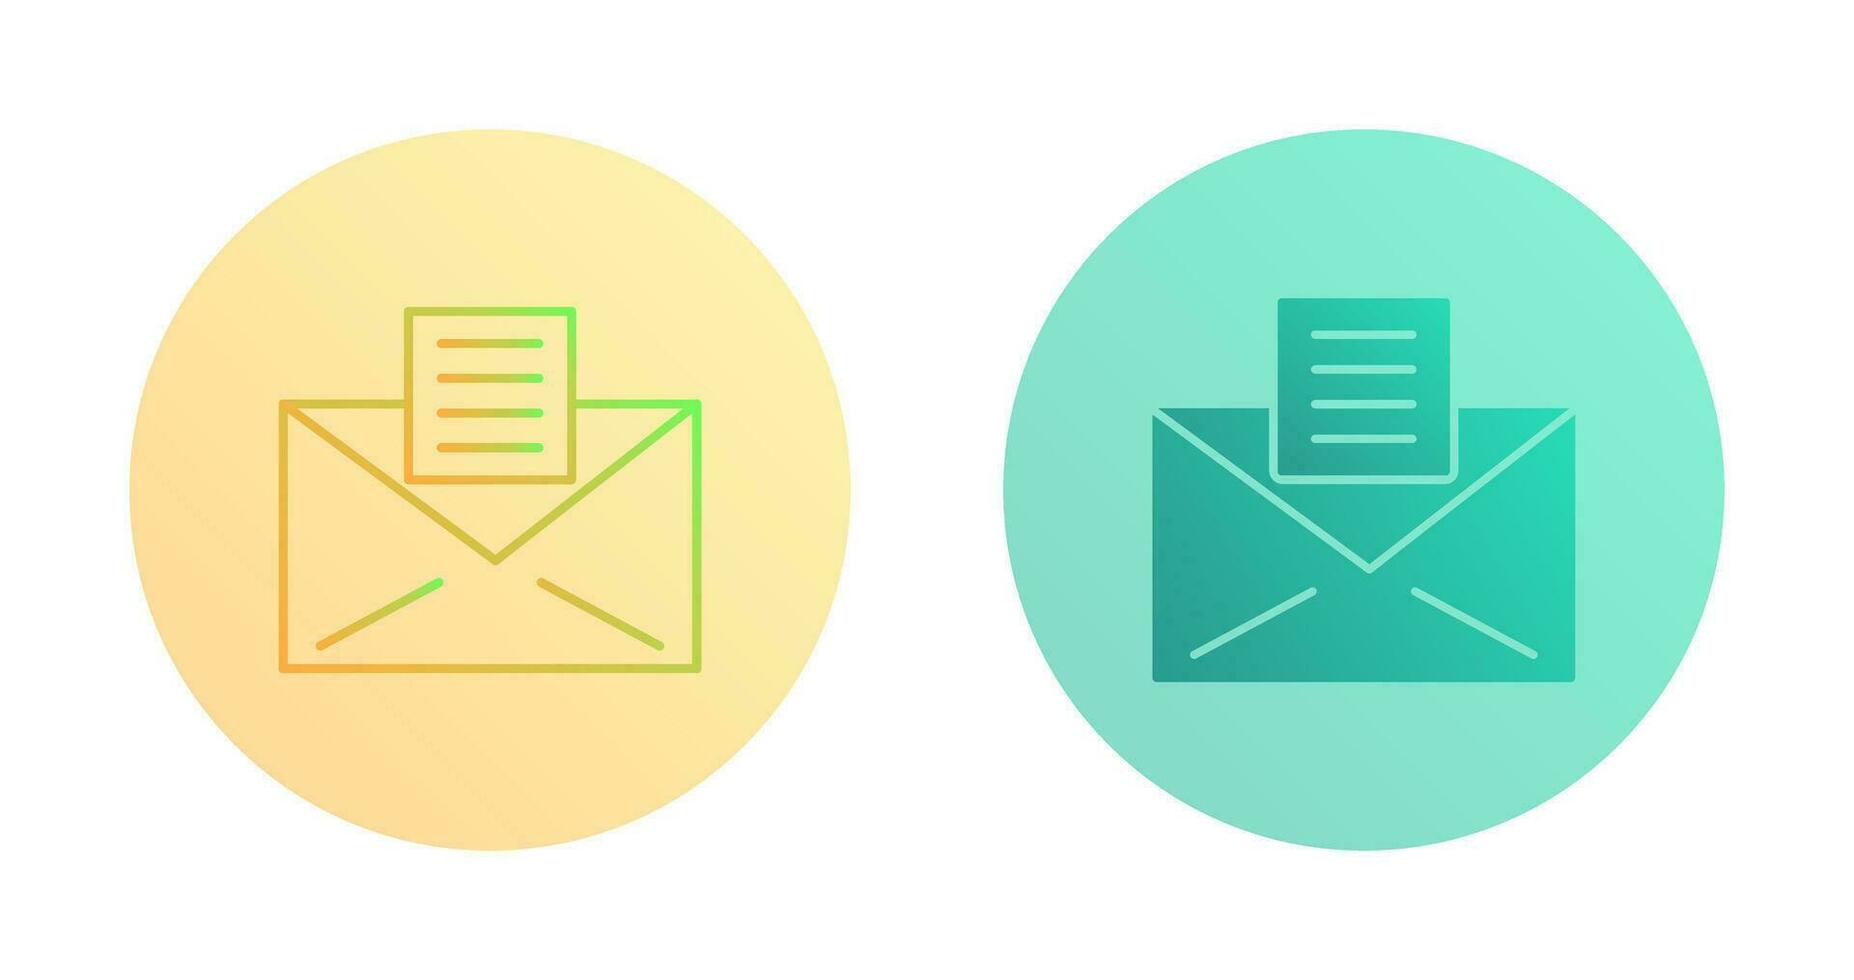 Email Documents Vector Icon